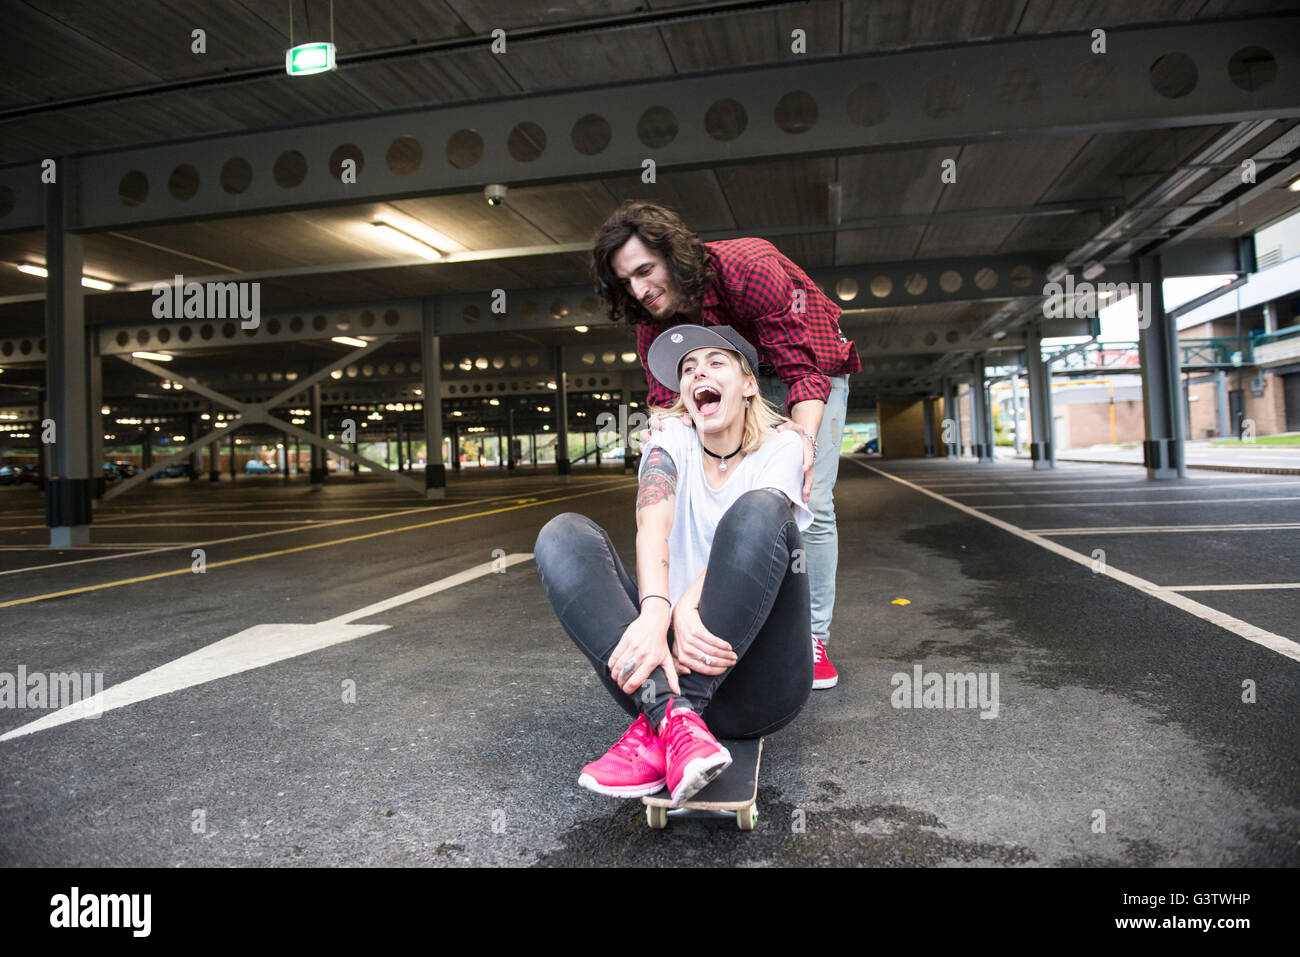 A cool young couple having fun with a skateboard. Stock Photo